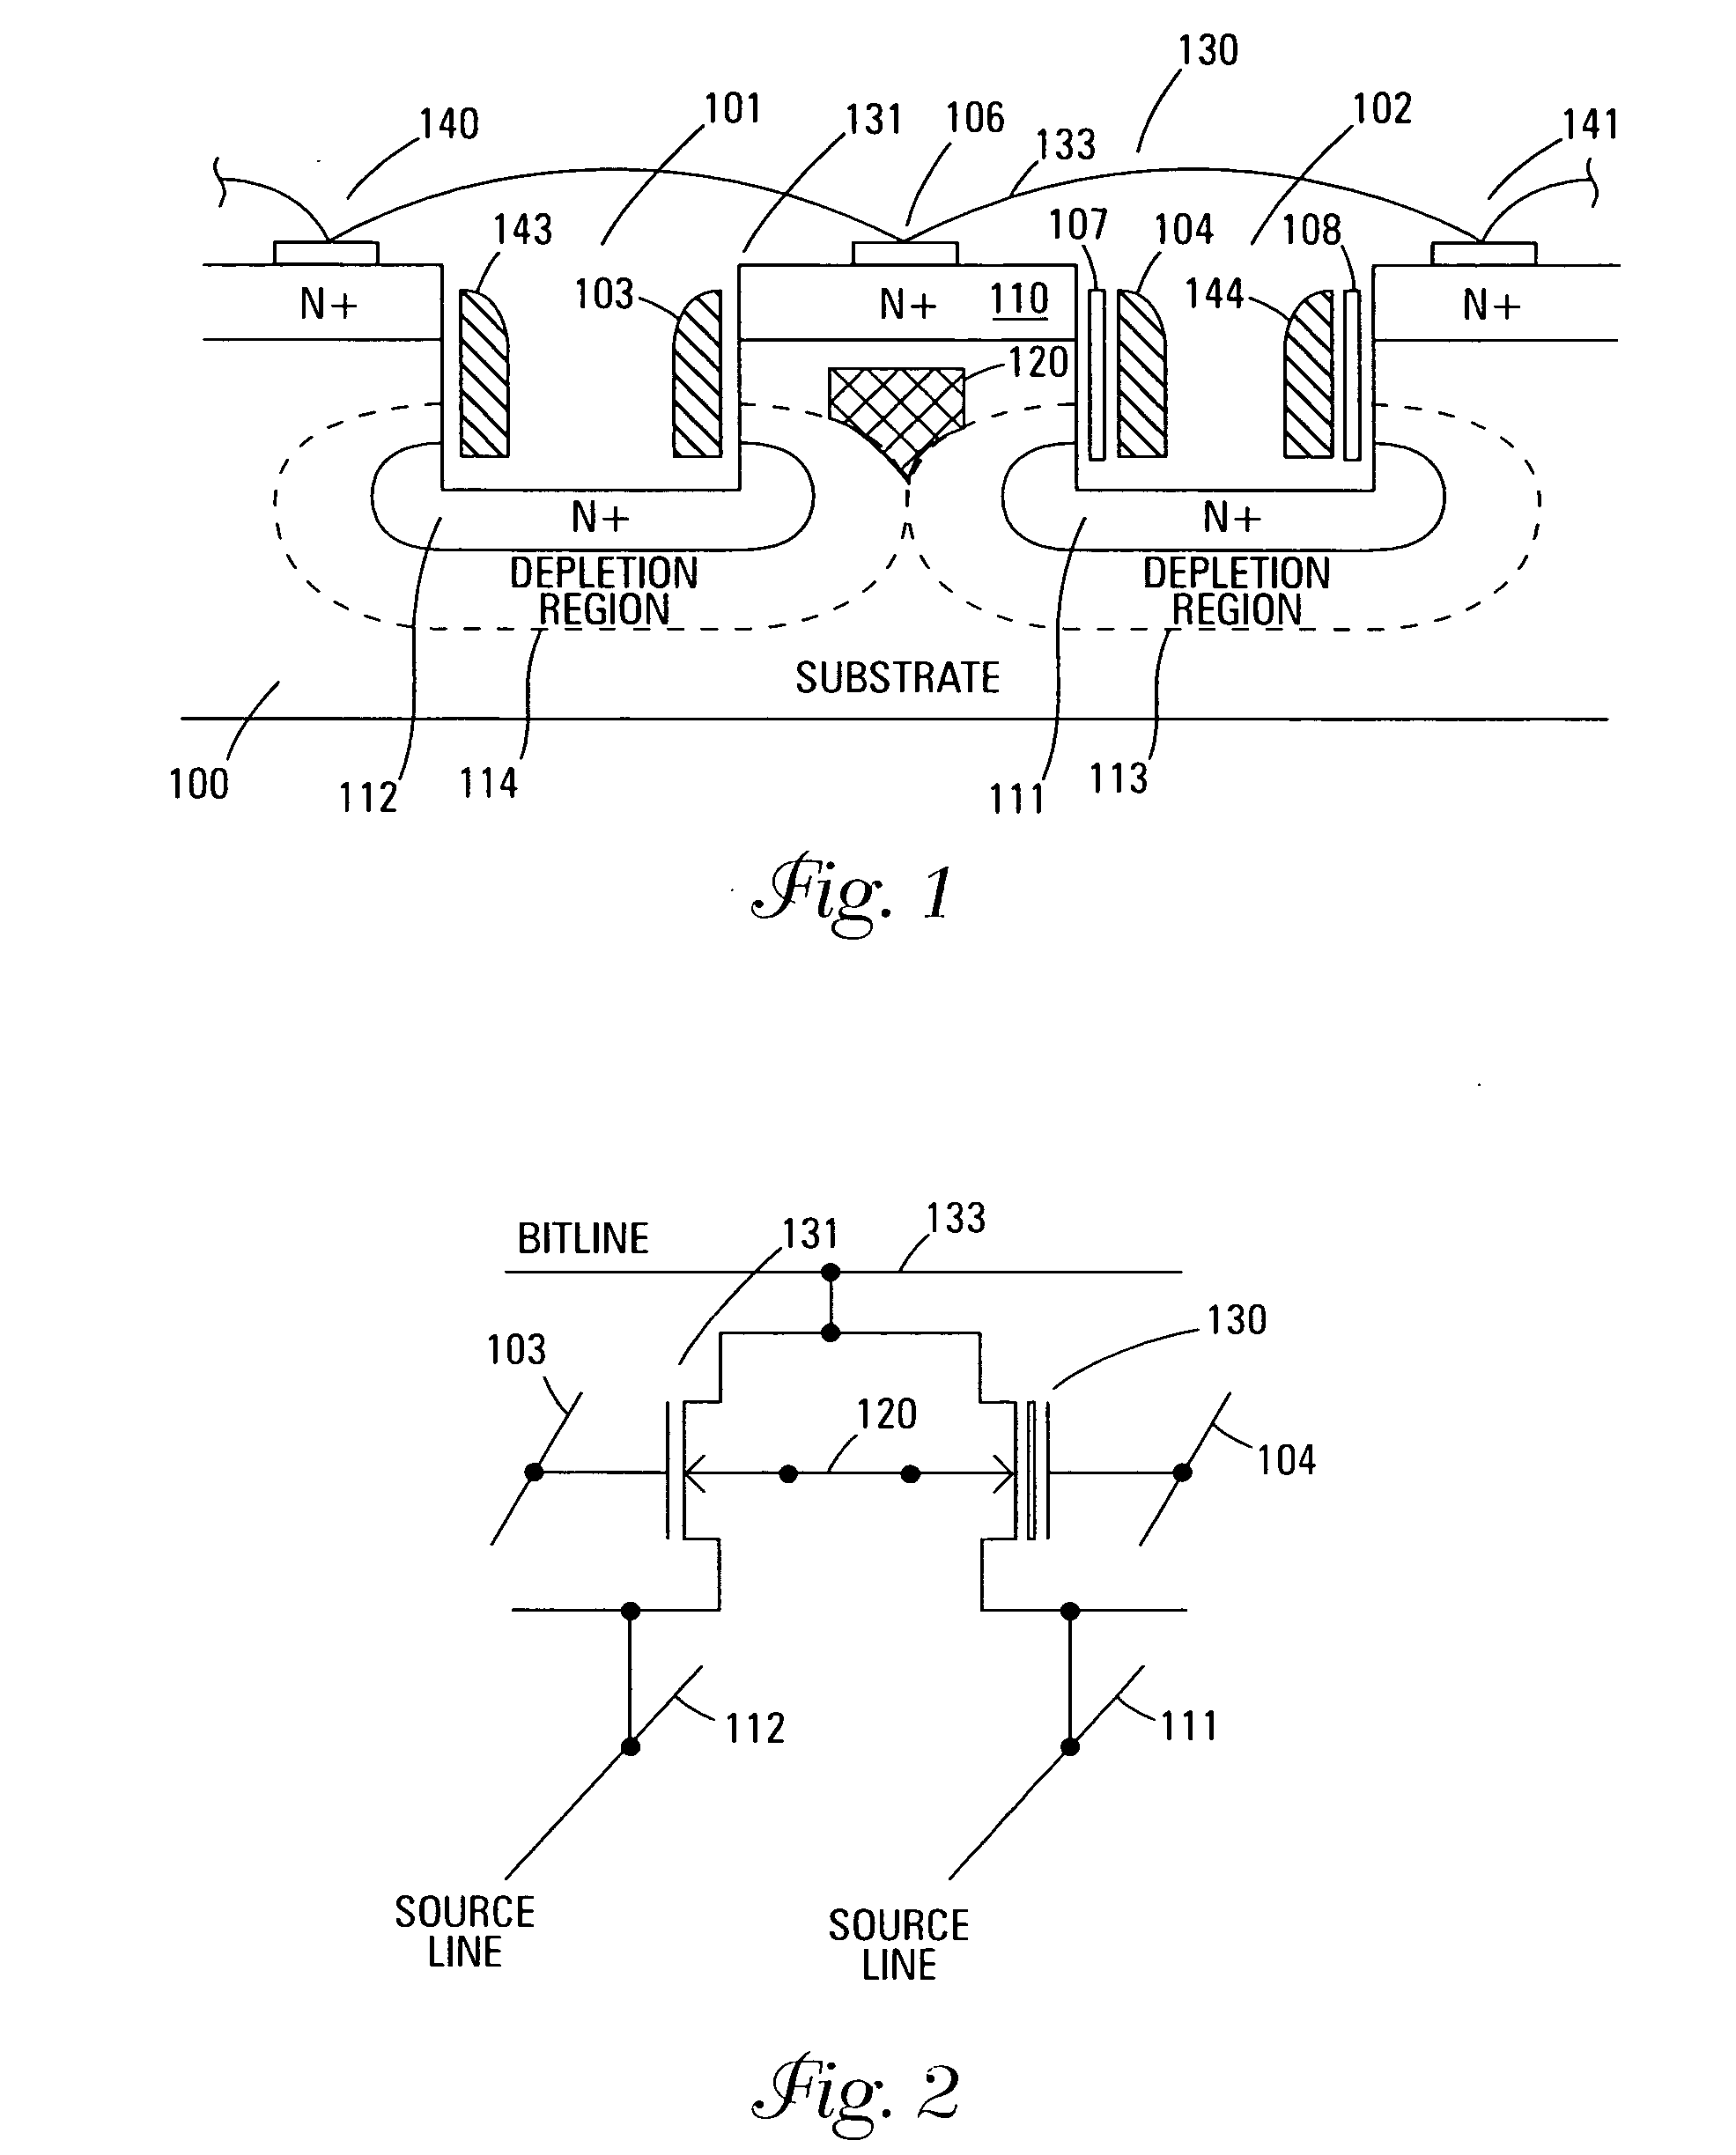 In-service reconfigurable dram and flash memory device